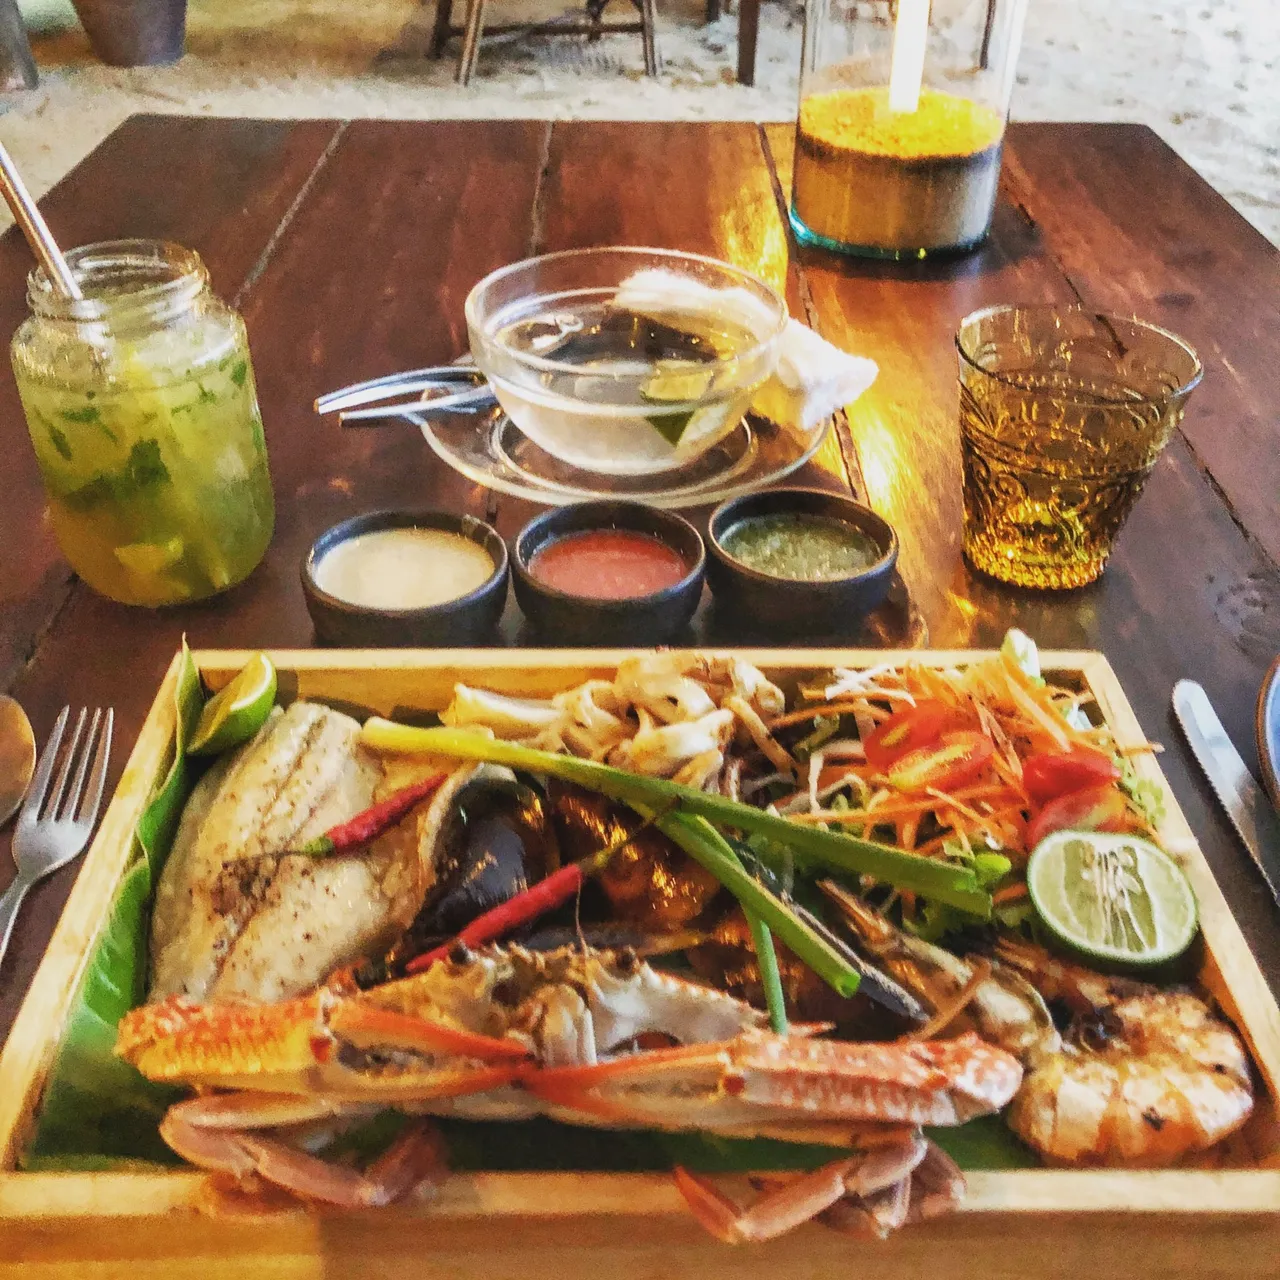 One of the best meals I had in Koh Phangan, Thailand